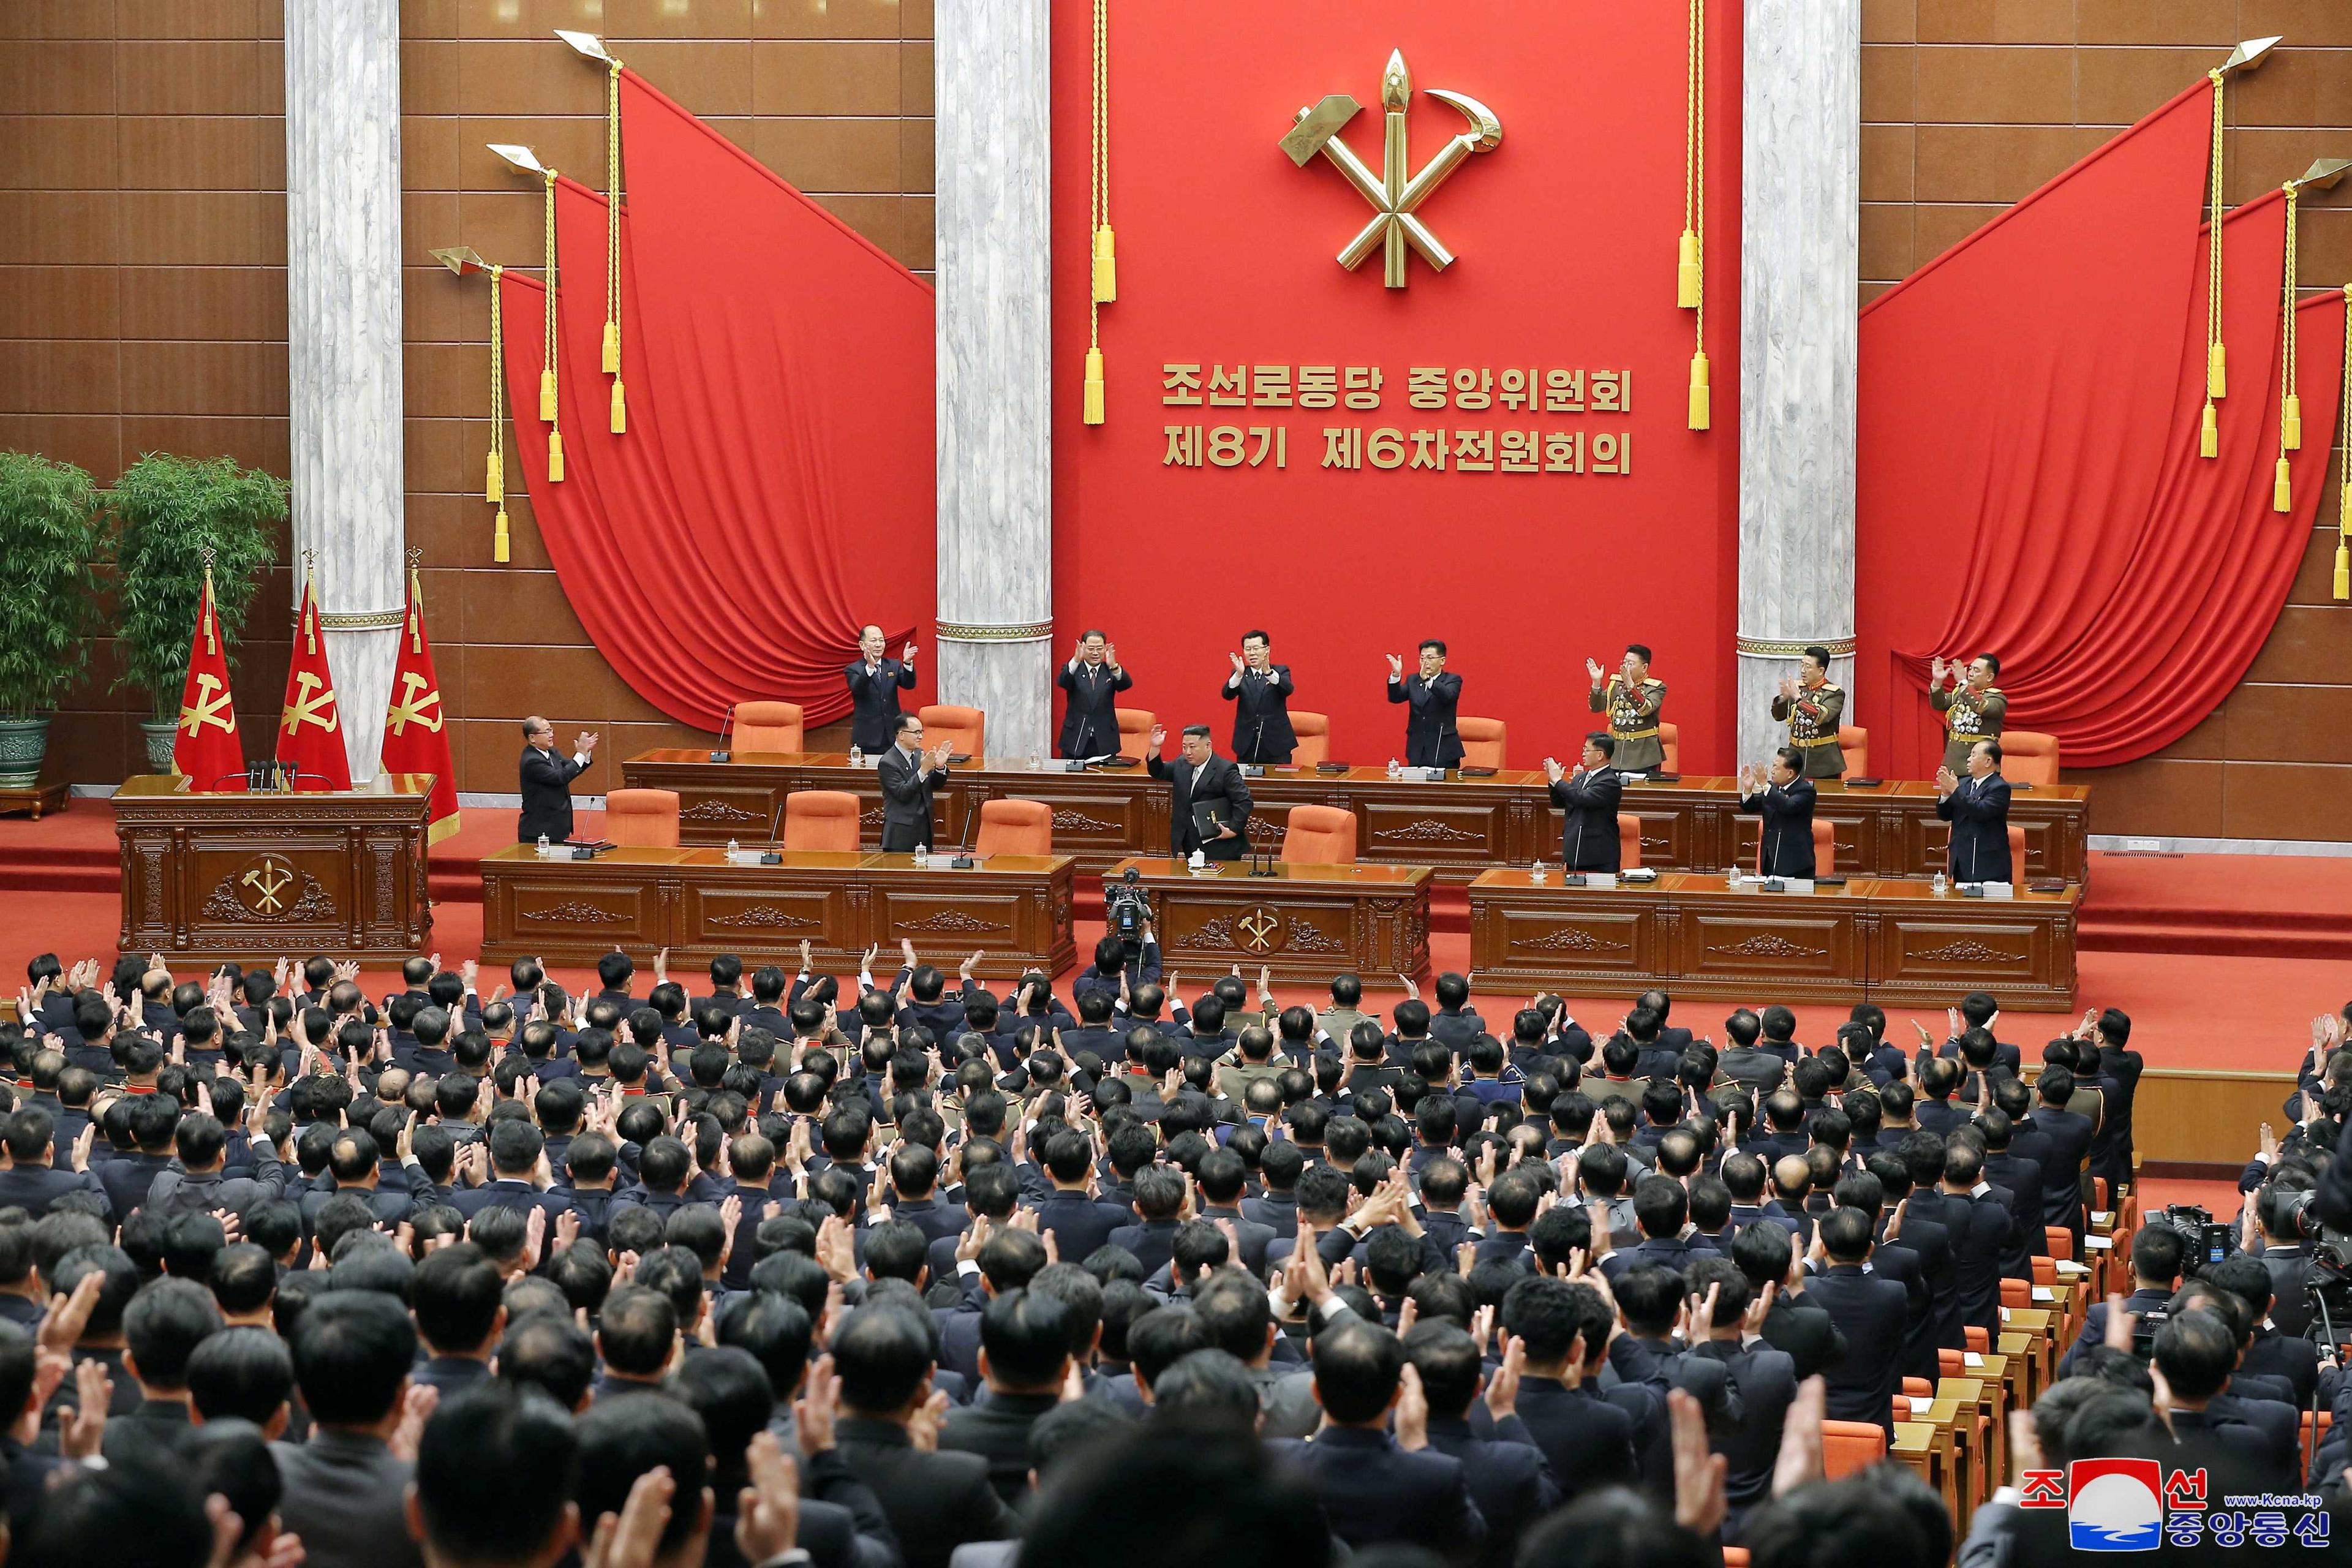 North Korean leader Kim Jong Un attends a session in Pyongyang, North Korea, in this photo released on Jan 1, by North Korea's Korean Central News Agency (KCNA). Photo: Reuters